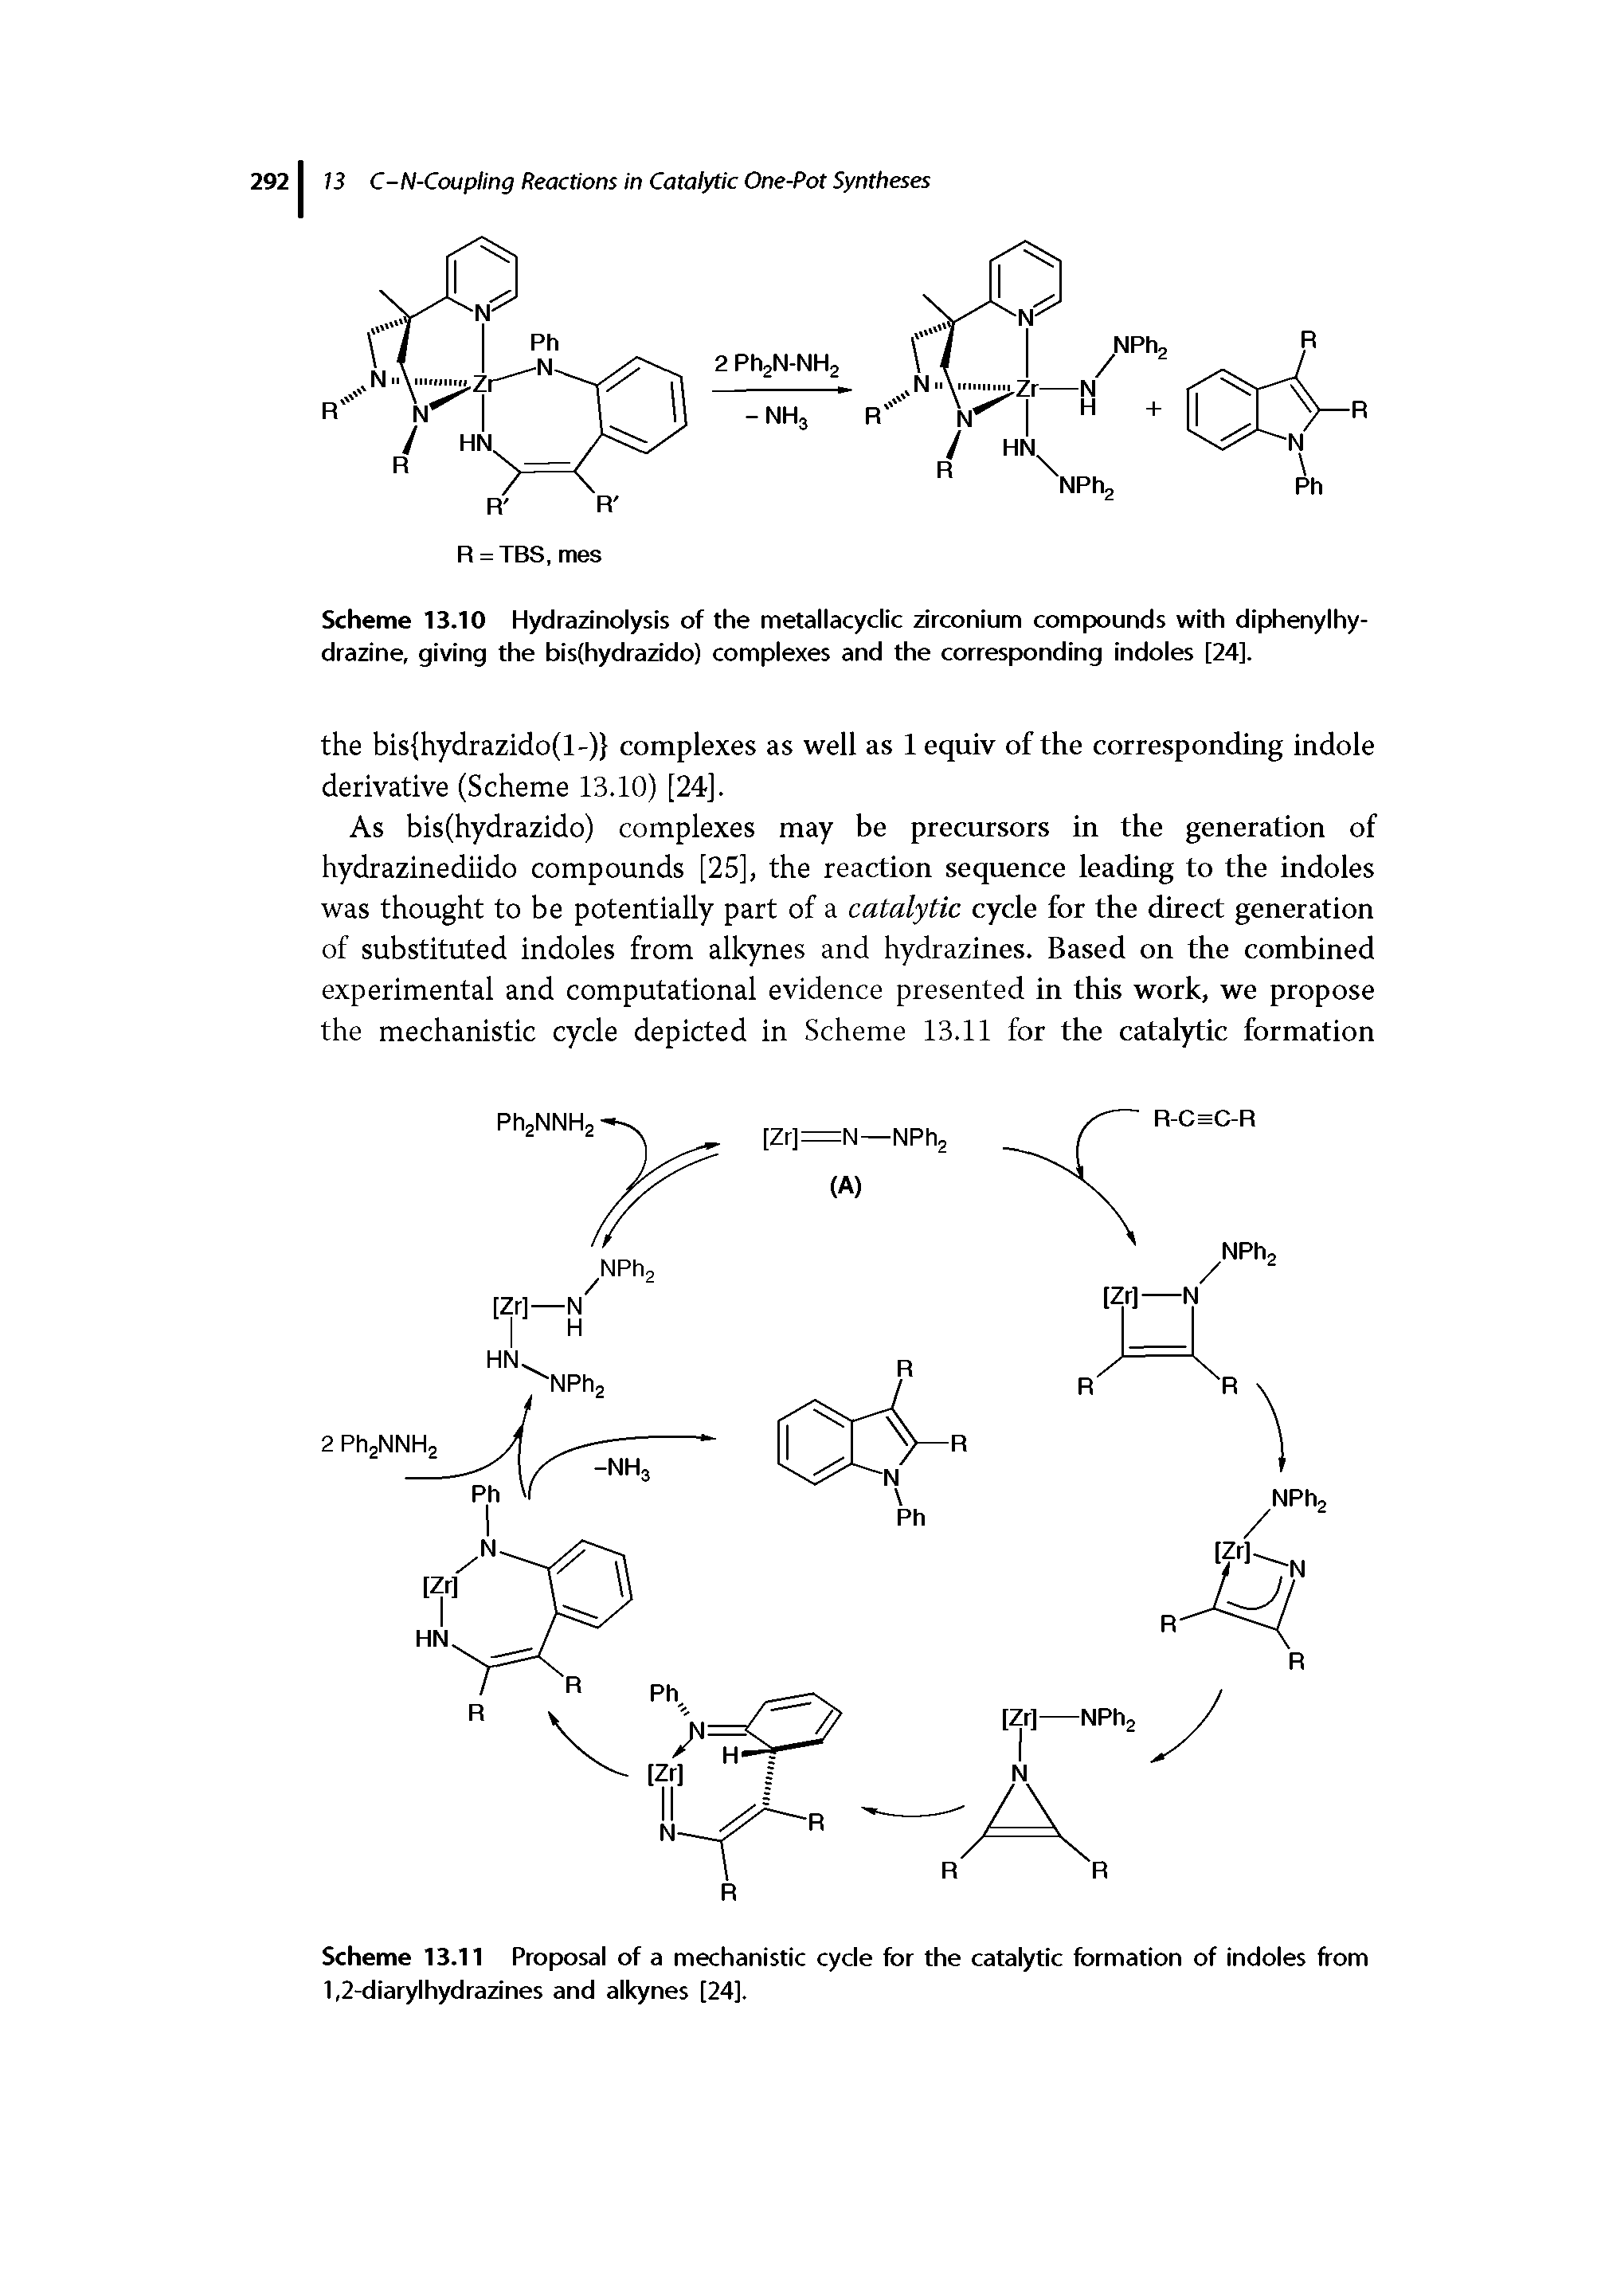 Scheme 13.10 Hydrazinolysis of the metallacyclic zirconium compounds with diphenylhy-drazine, giving the bis(hydrazido) complexes and the corresponding indoles [24].